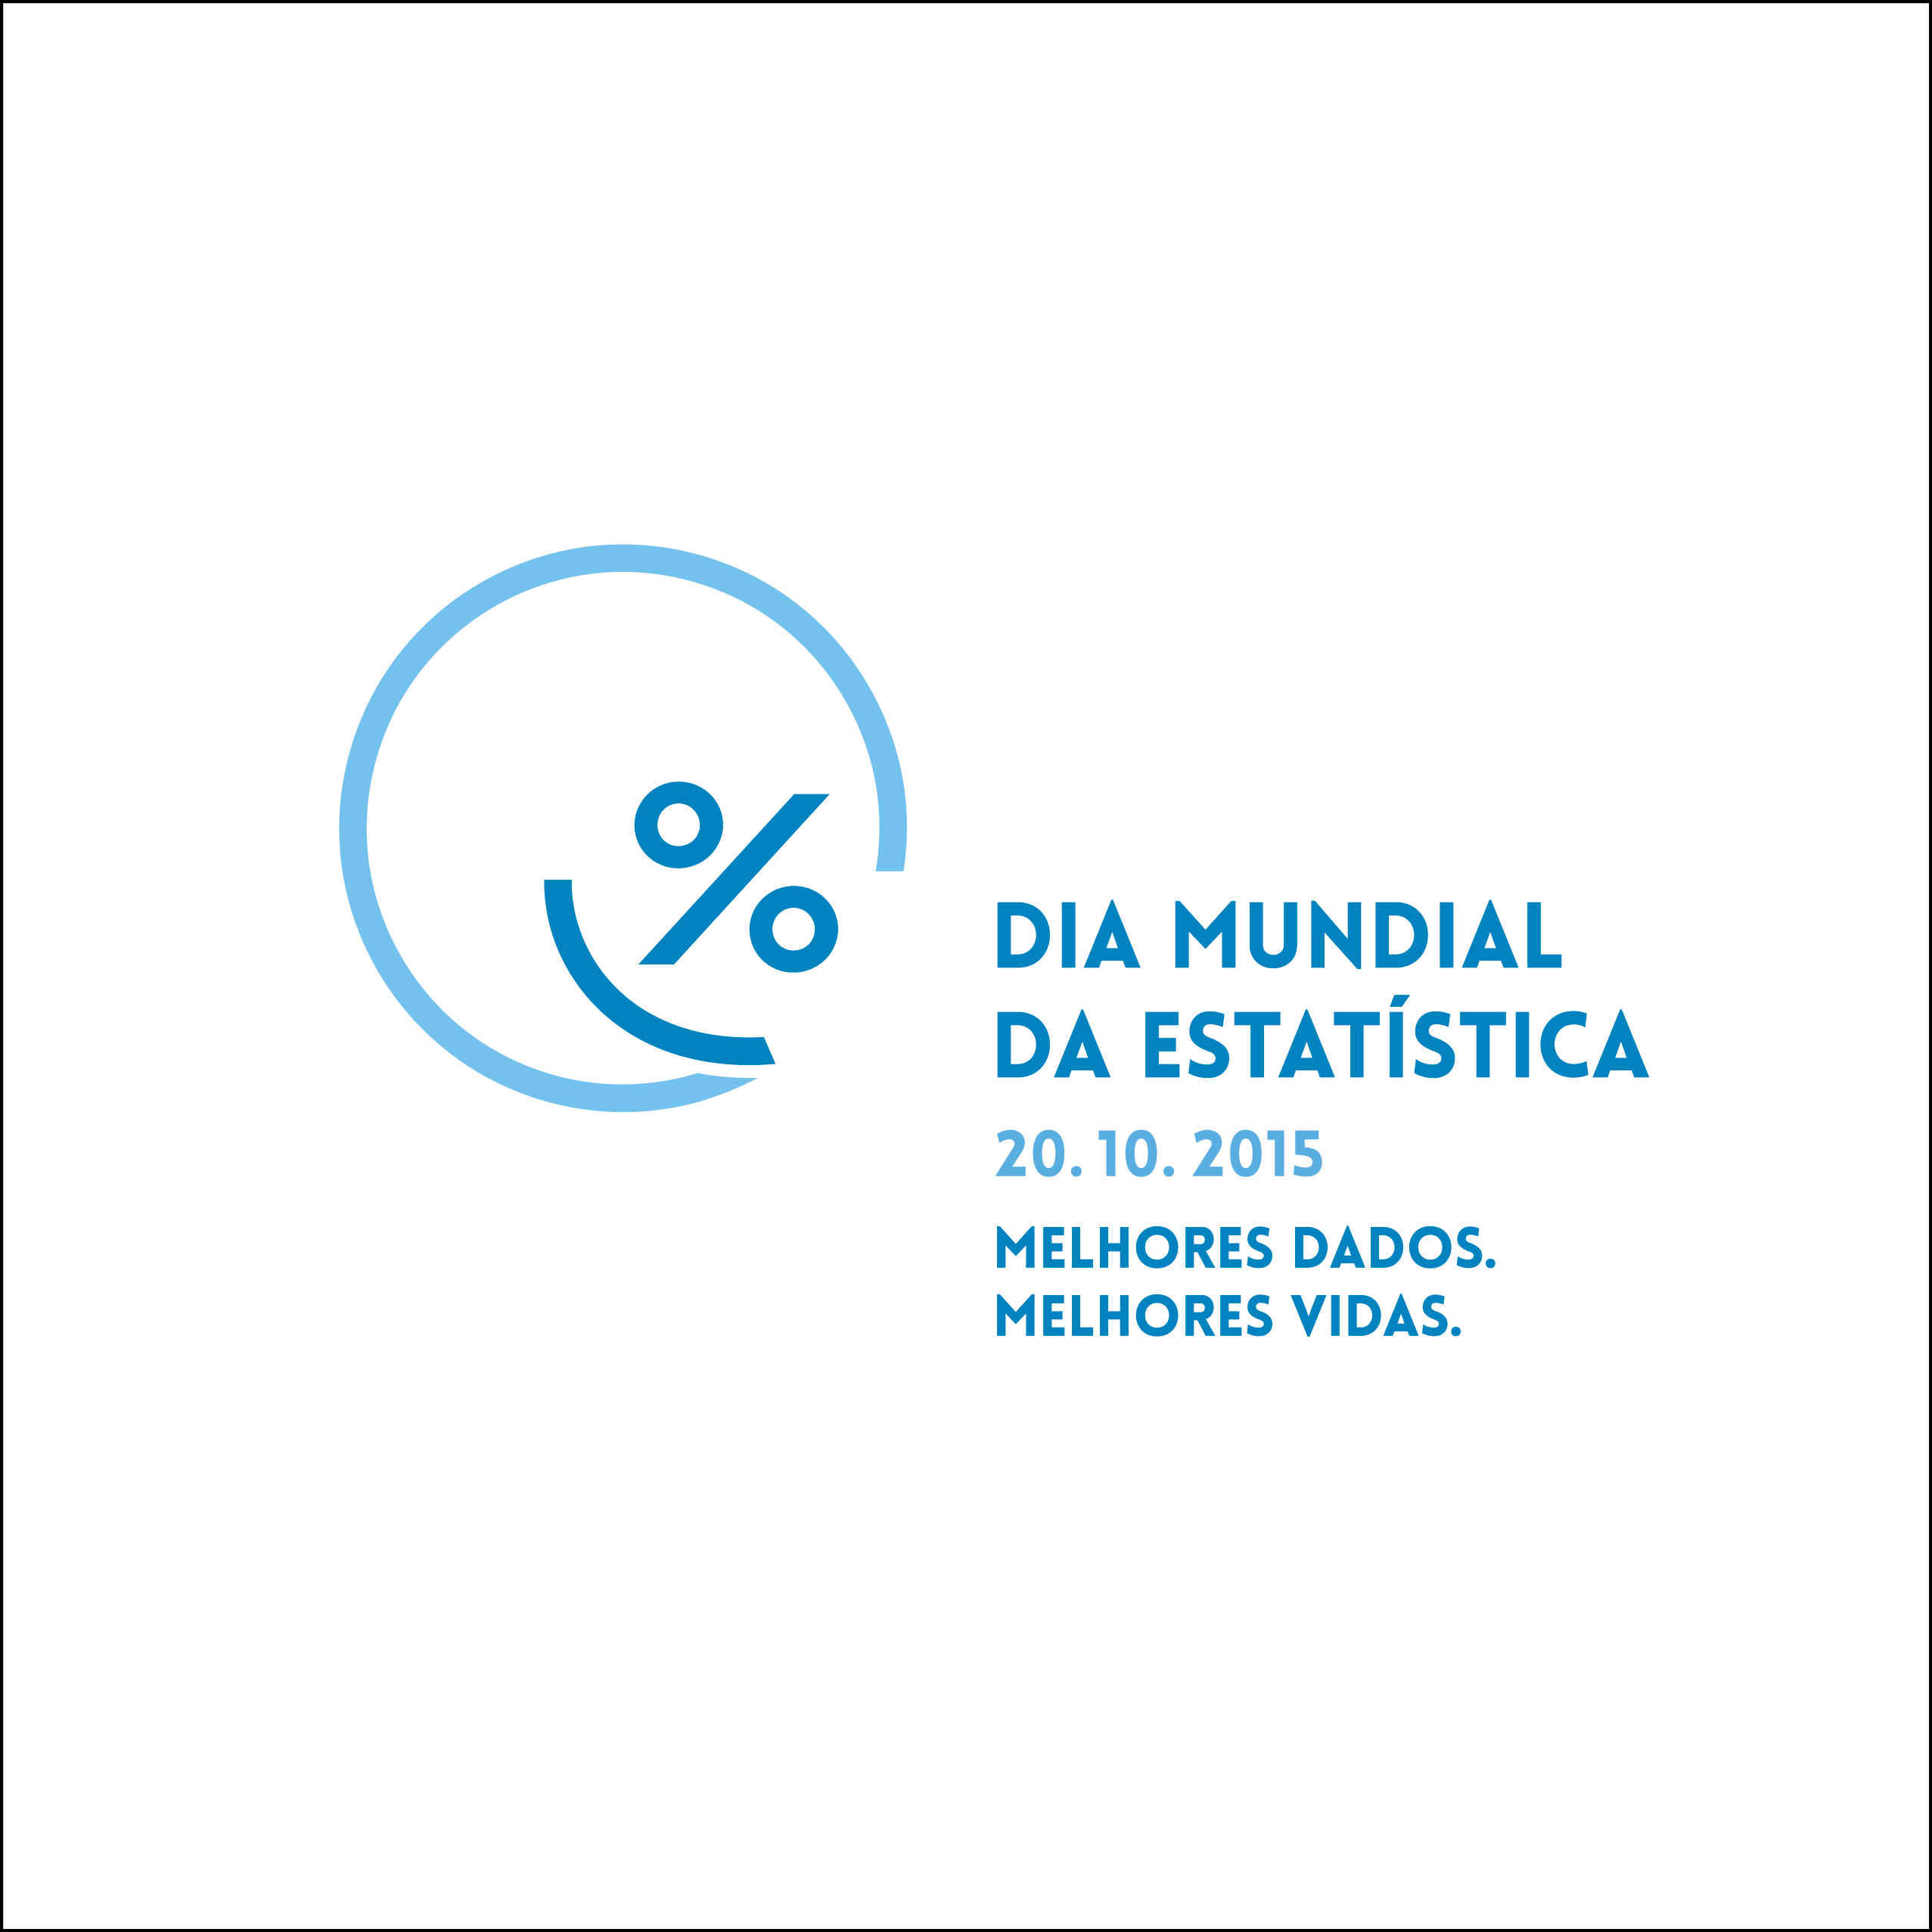 World Statistics Day Logo in Portugese